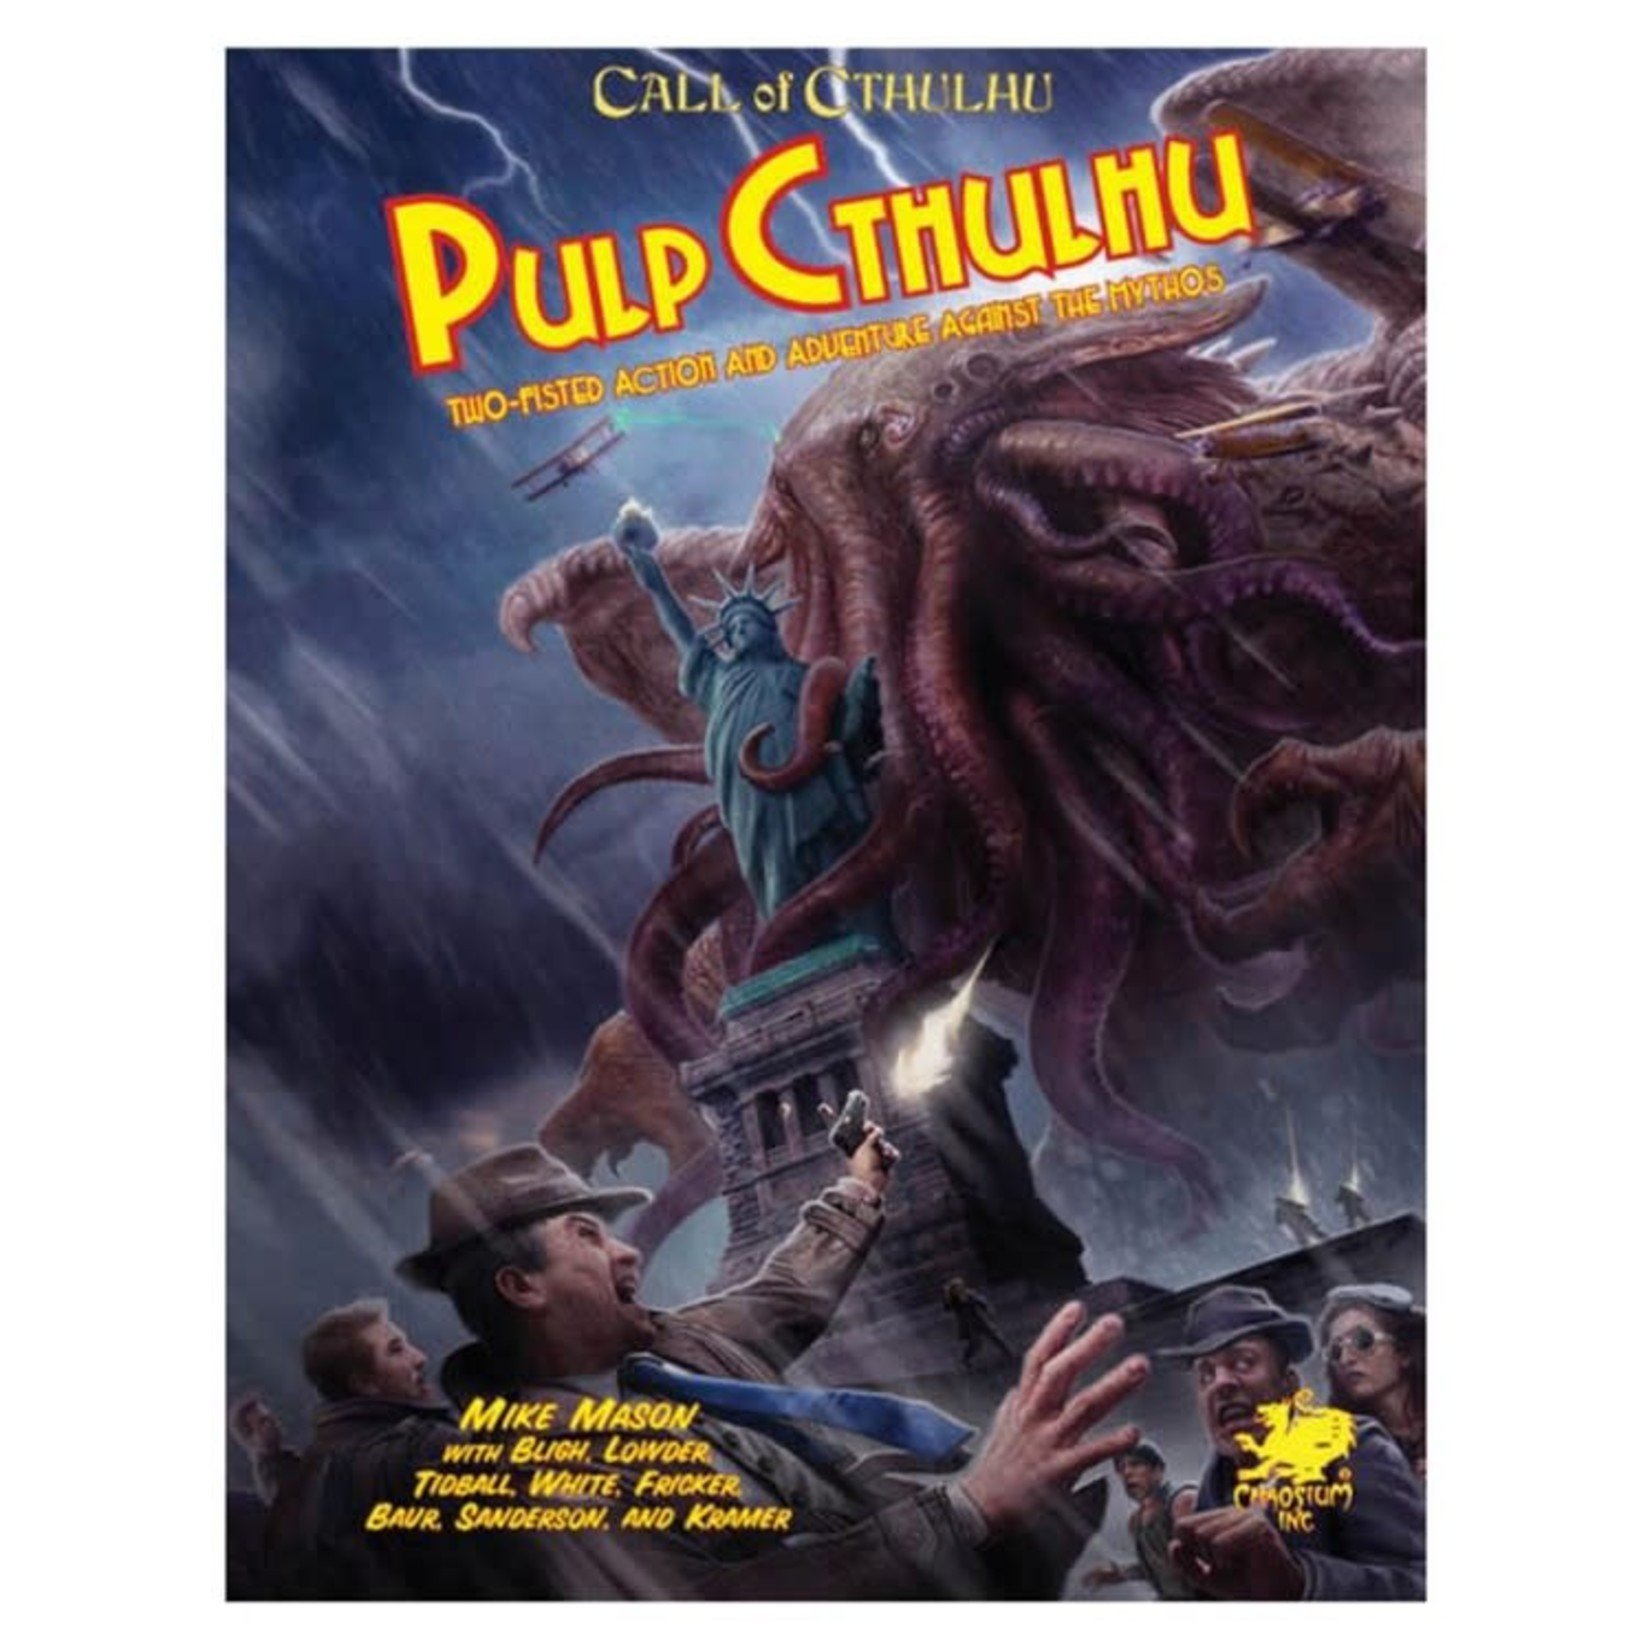 Chaosium Call of Cthulhu Pulp Cthulhu Two-Fisted Action and Adventure Against the Mythos HC